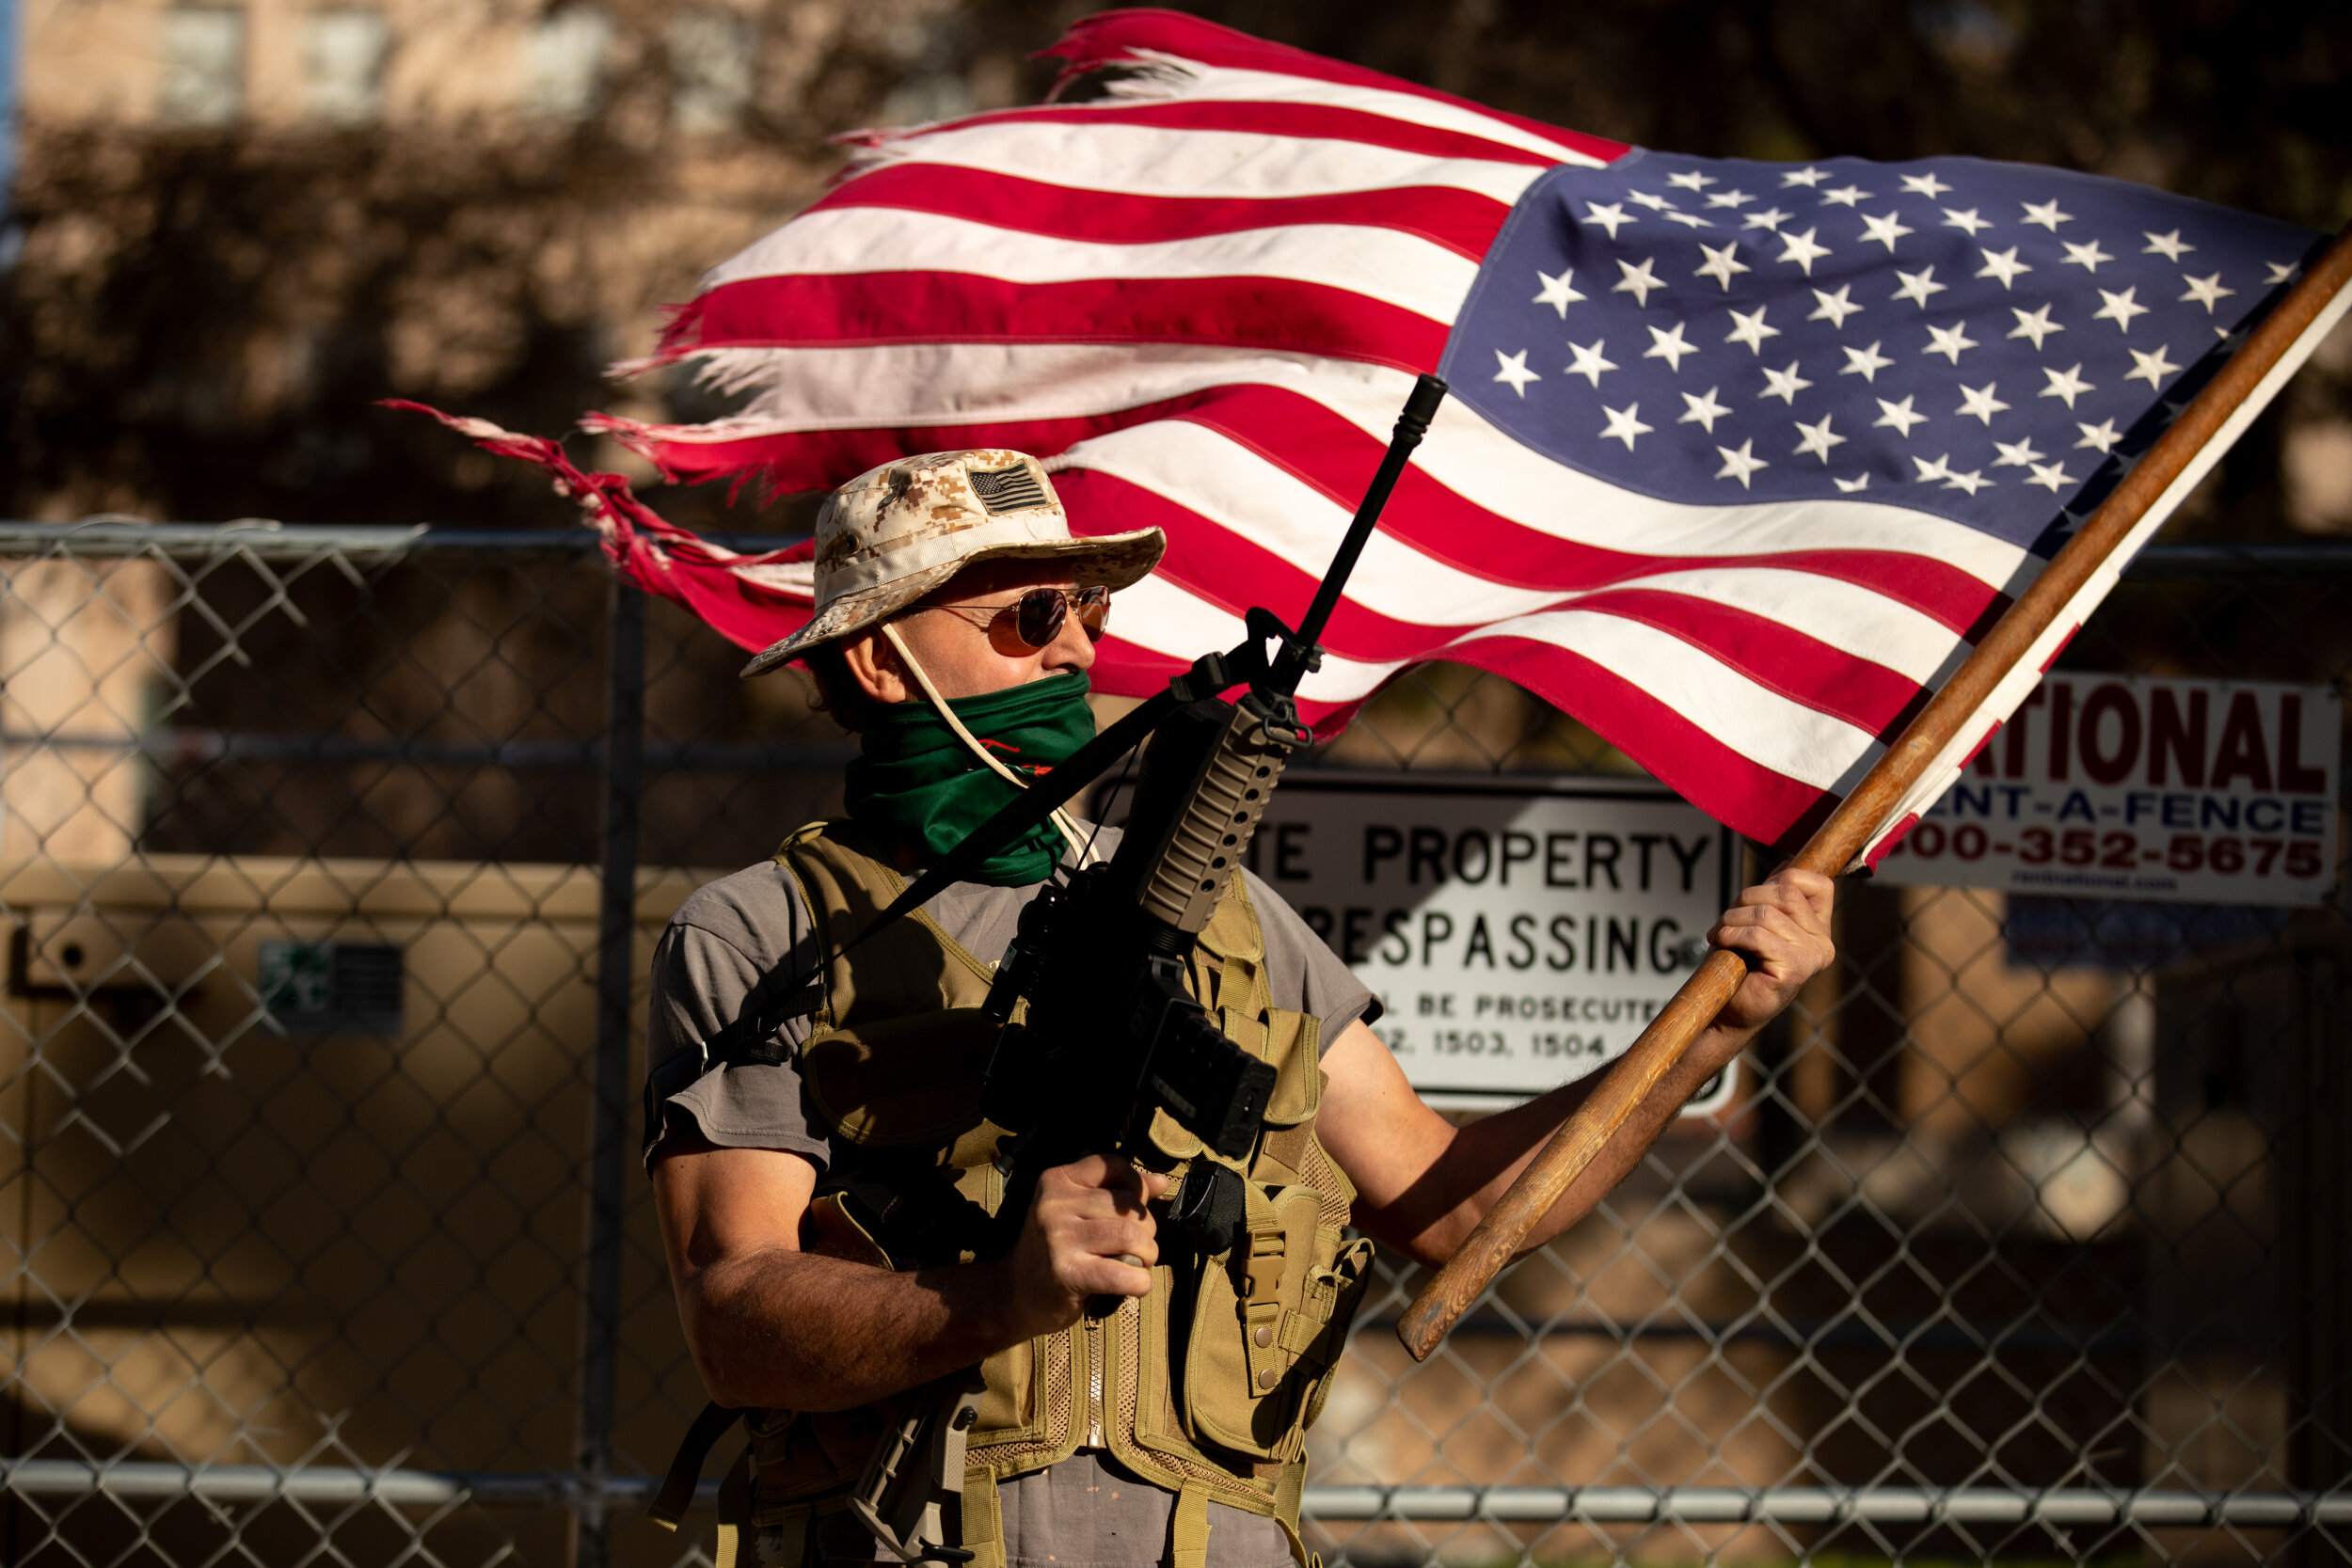  A supporter of President Trump holds a flag and gun outside the Arizona State Capitol on January 20, 2021 in Phoenix, Arizona. (Photo by Courtney Pedroza for the Washington Post) 